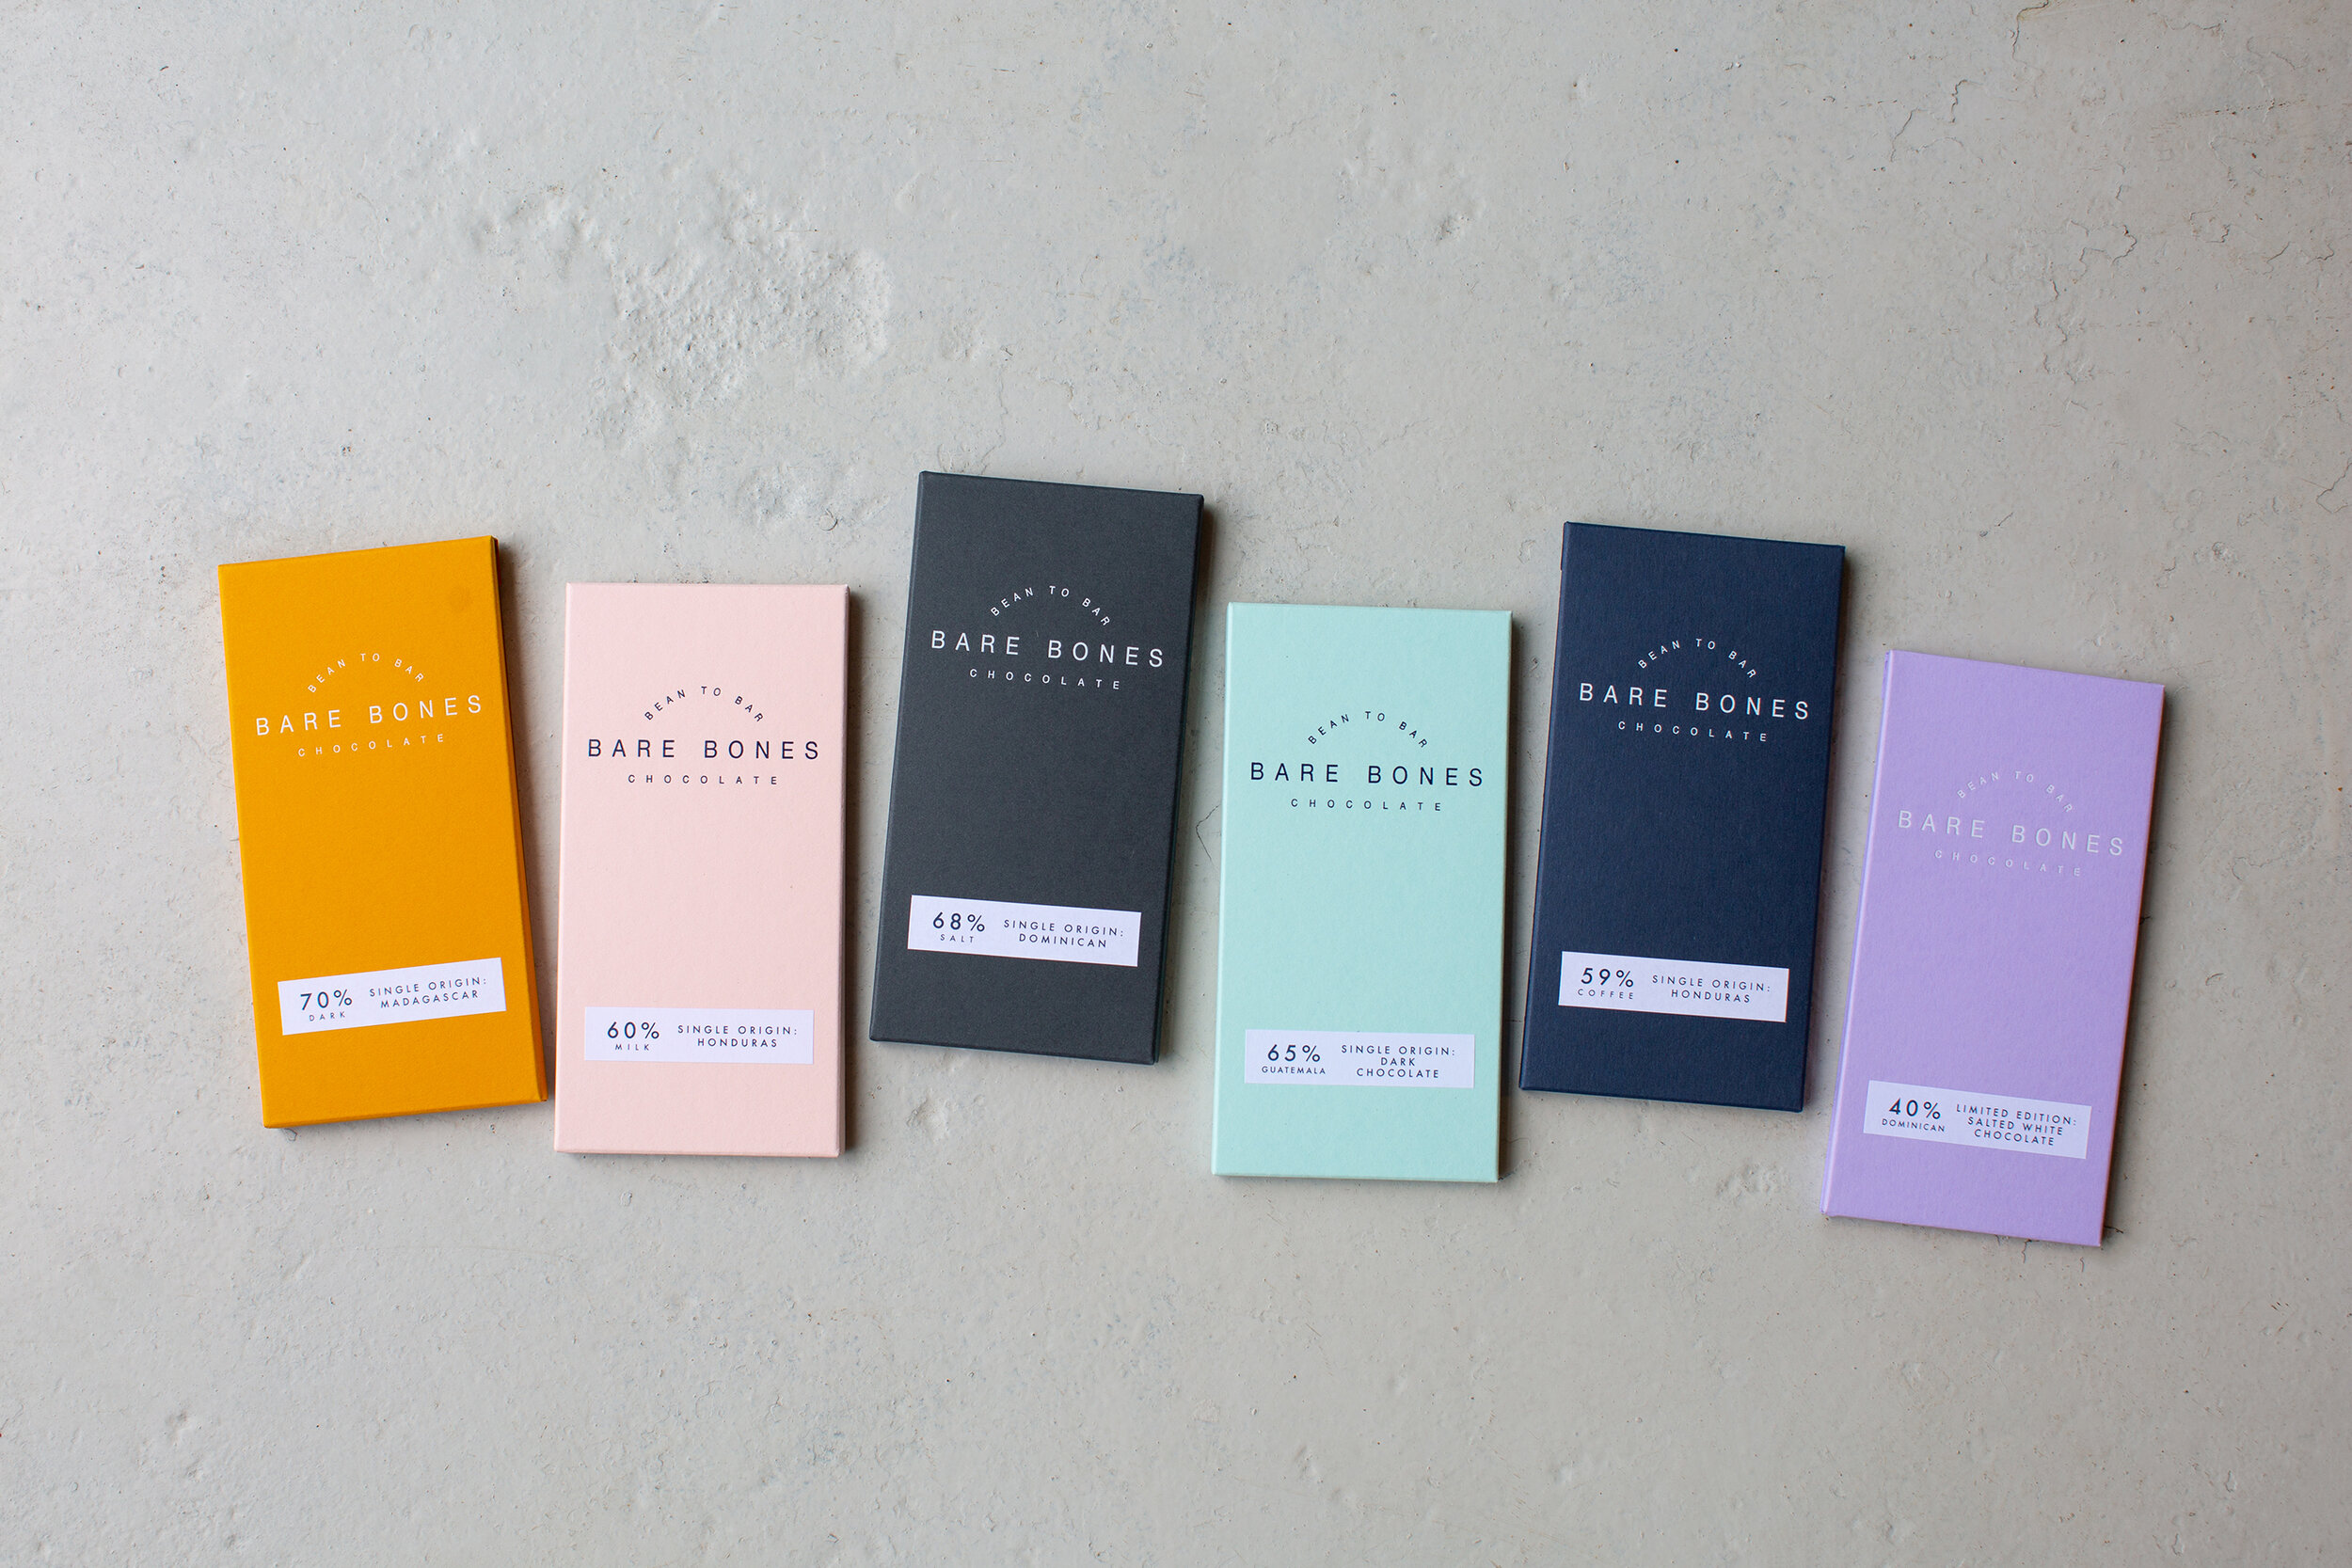 91 Magazine: Love What You Do interview with Bare Bones Chocolate